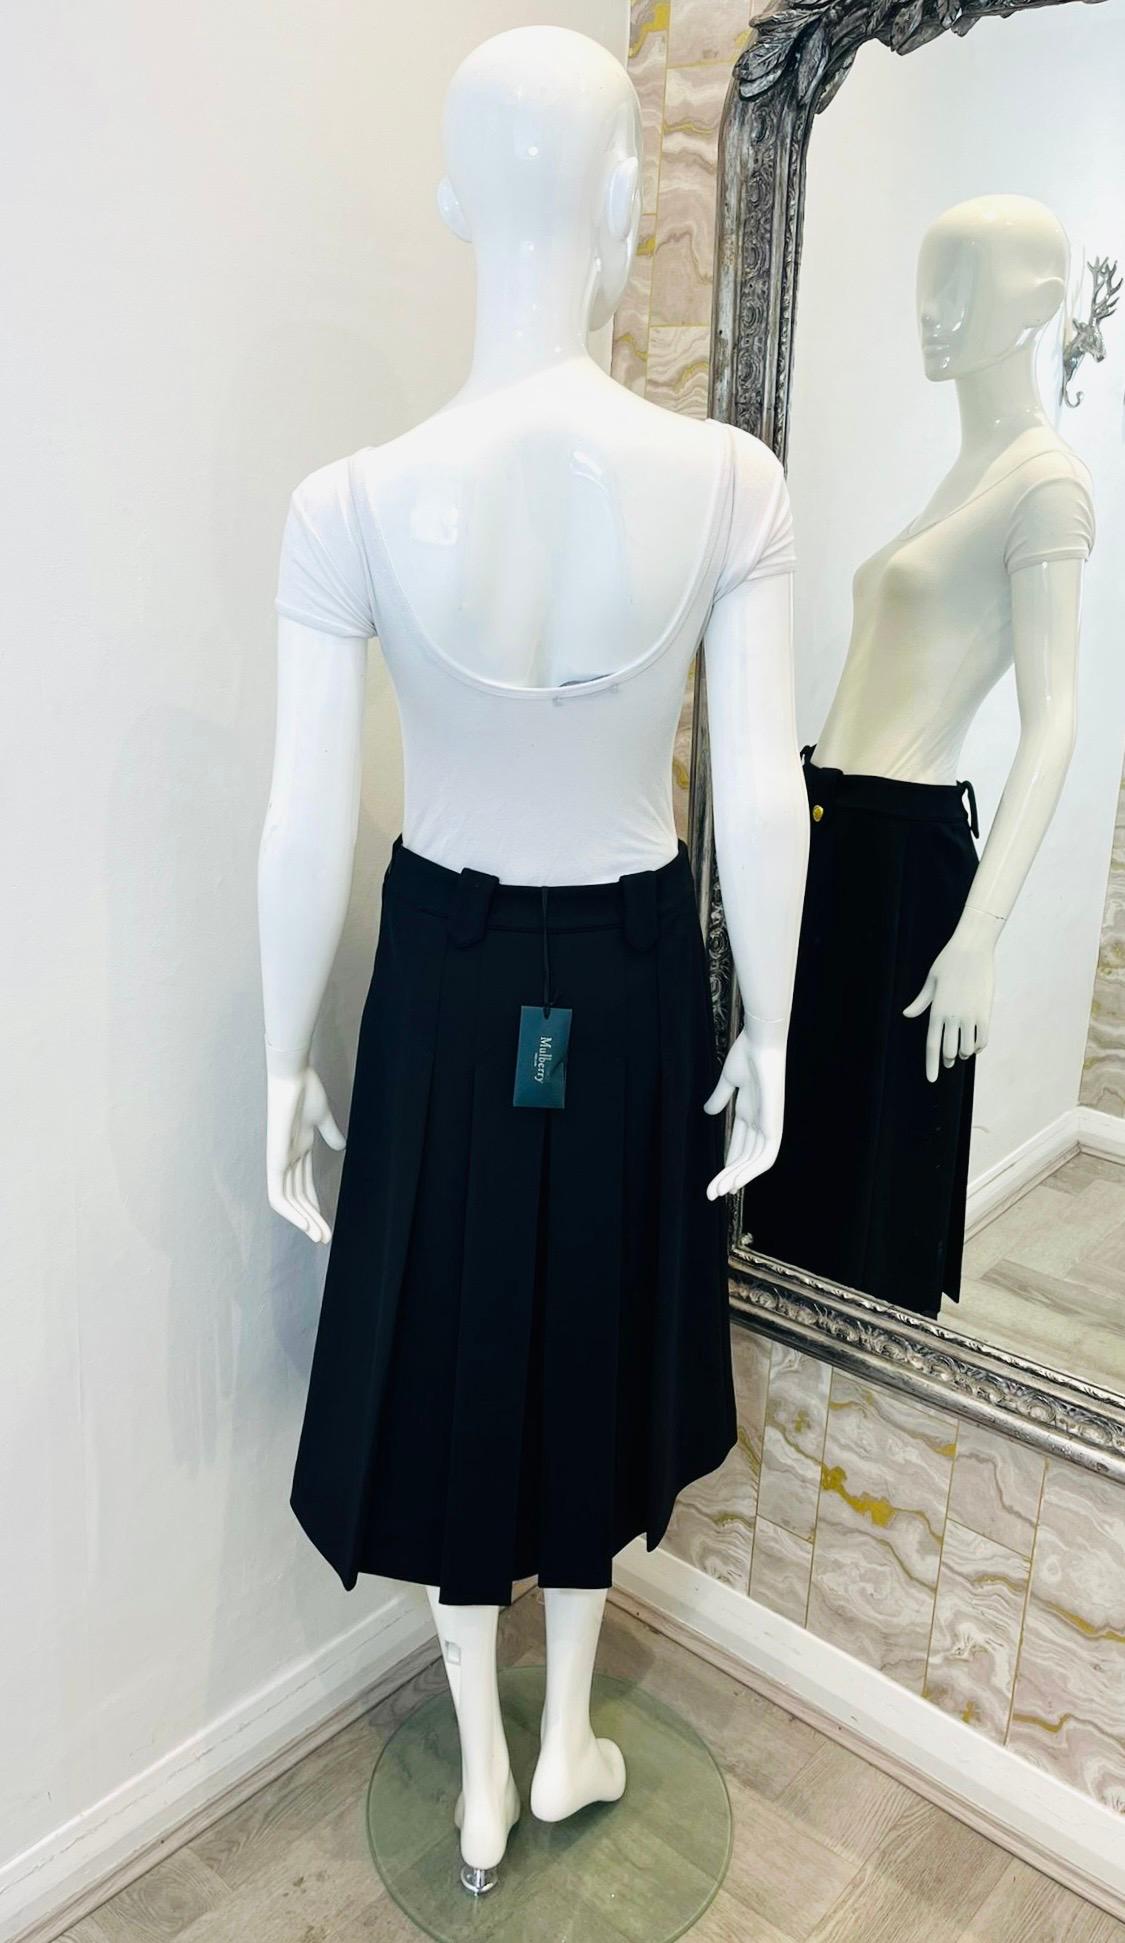 Mulberry Virgin Wool Blend Pleated Skirt In New Condition For Sale In London, GB